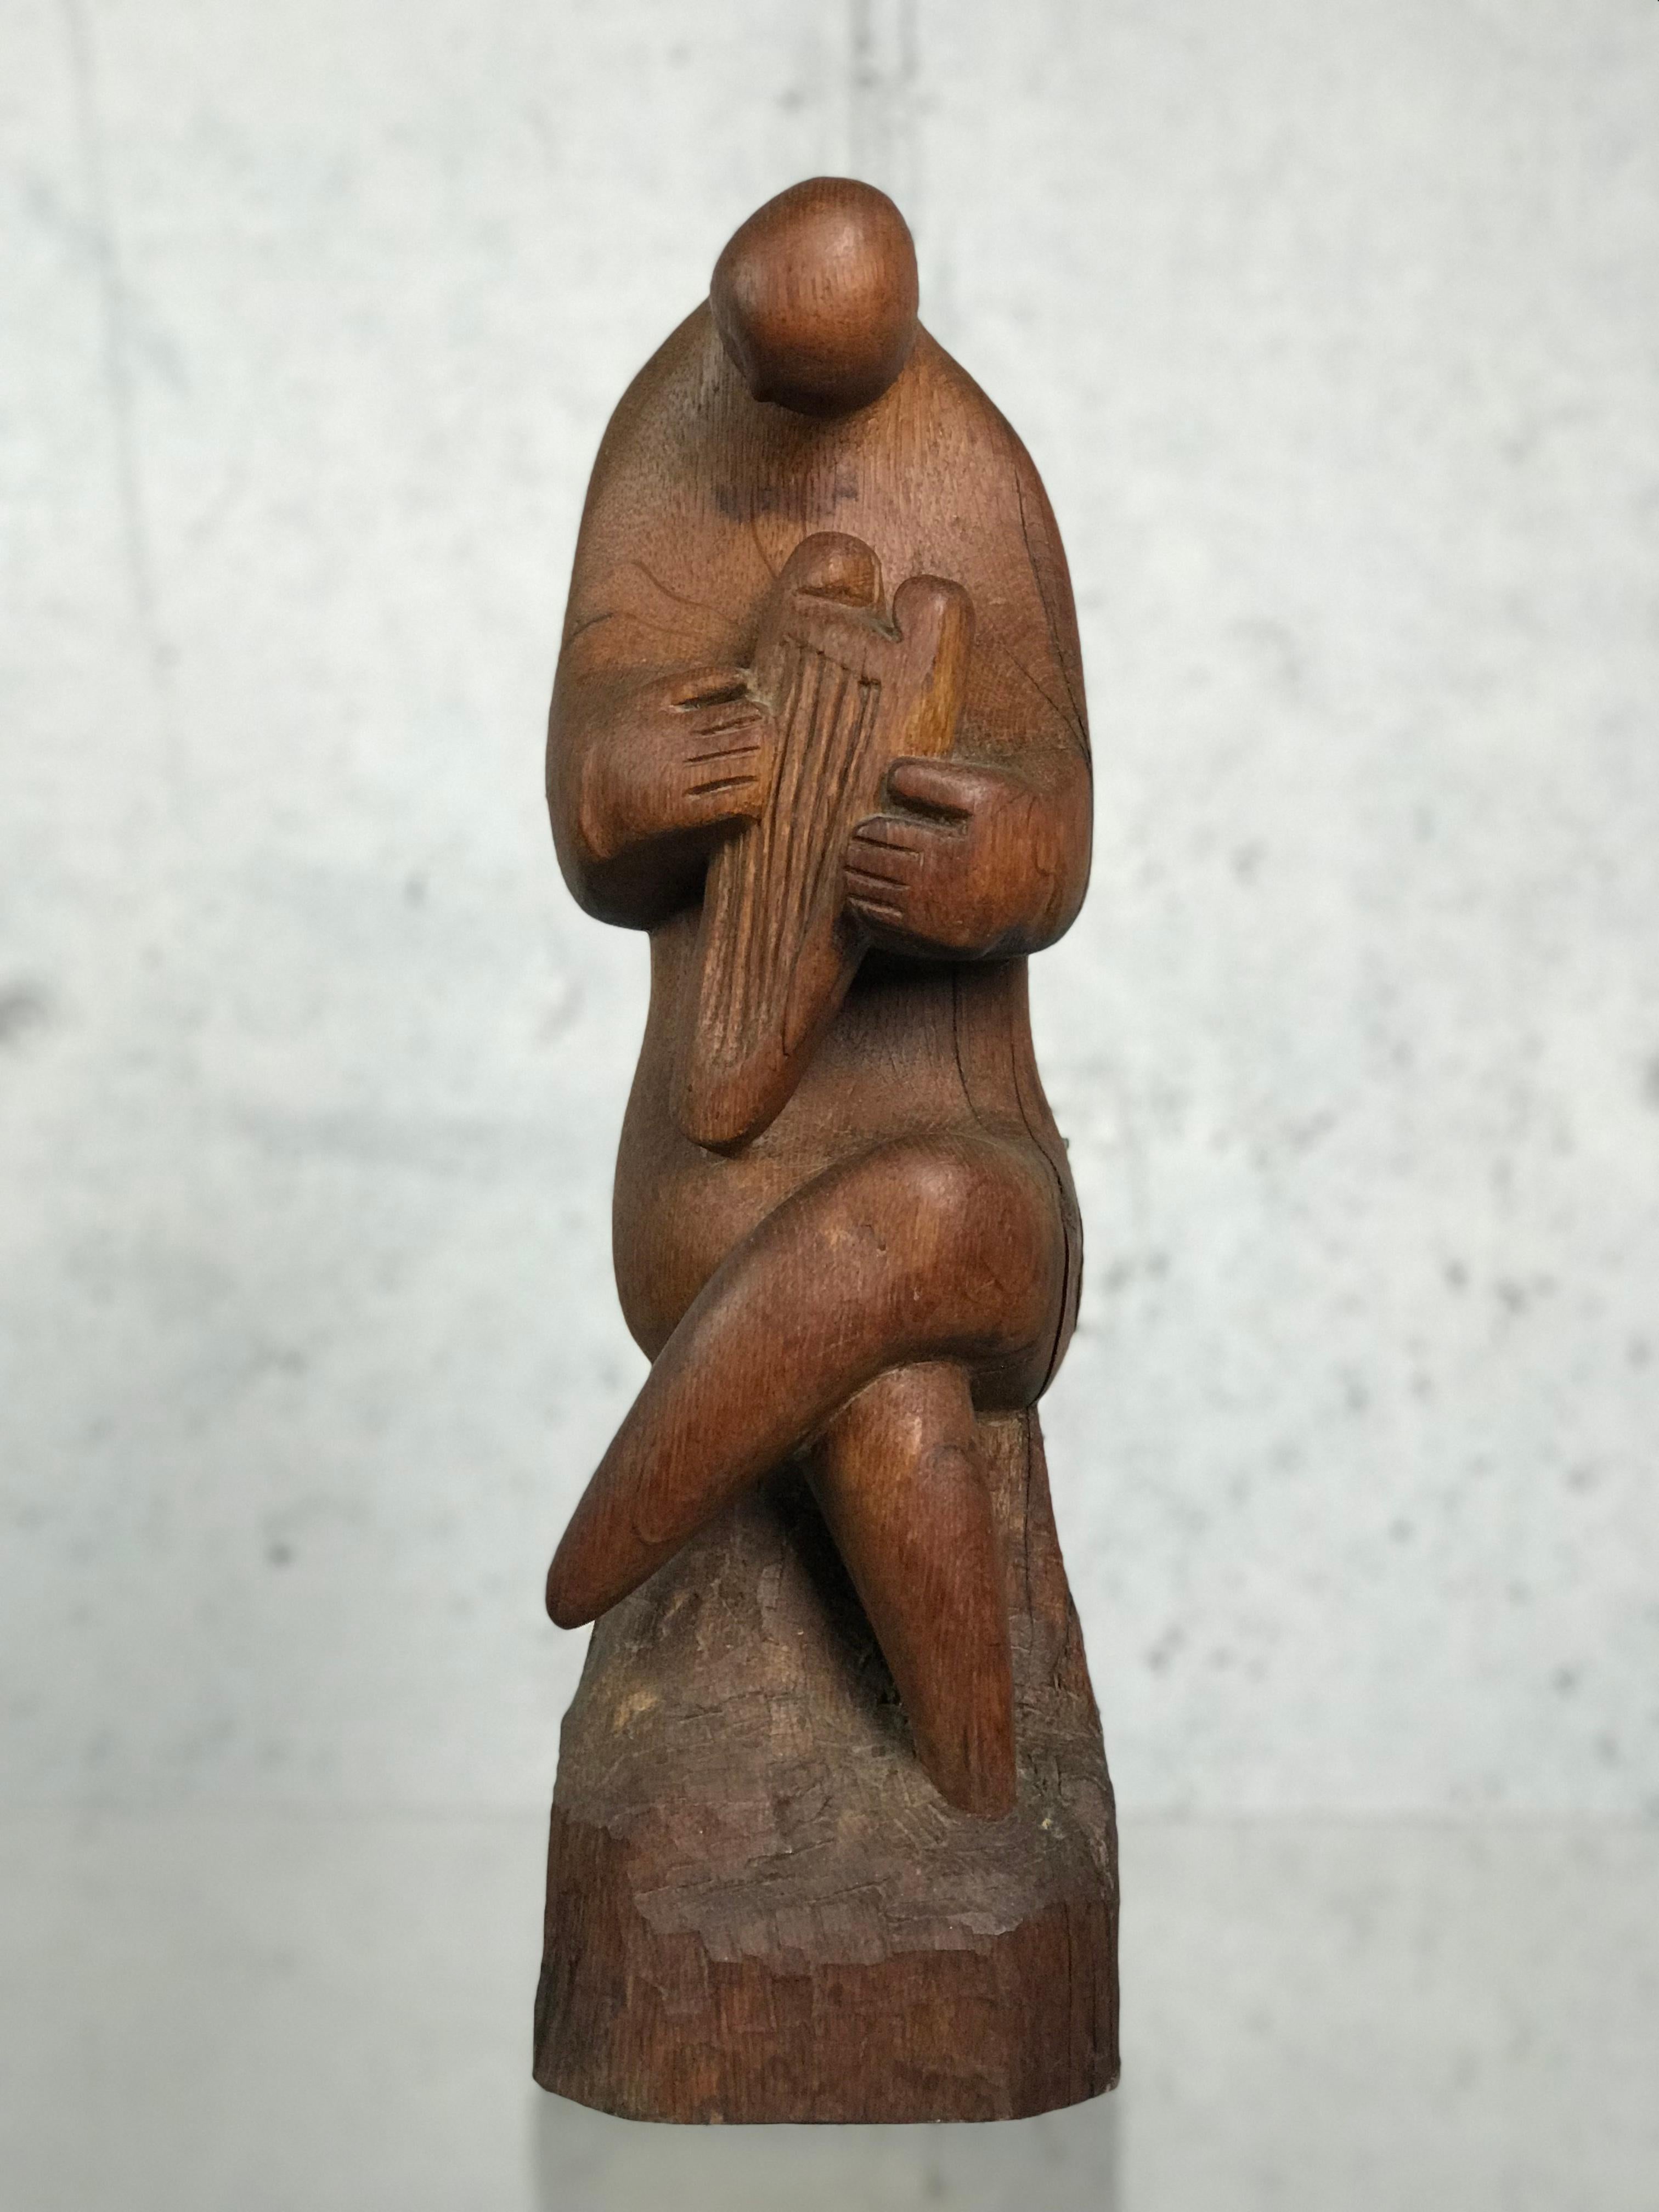 Well executed modernist harp player seated figure carved wood sculpture in untouched condition, circa 1960s. Artist unknown. 16